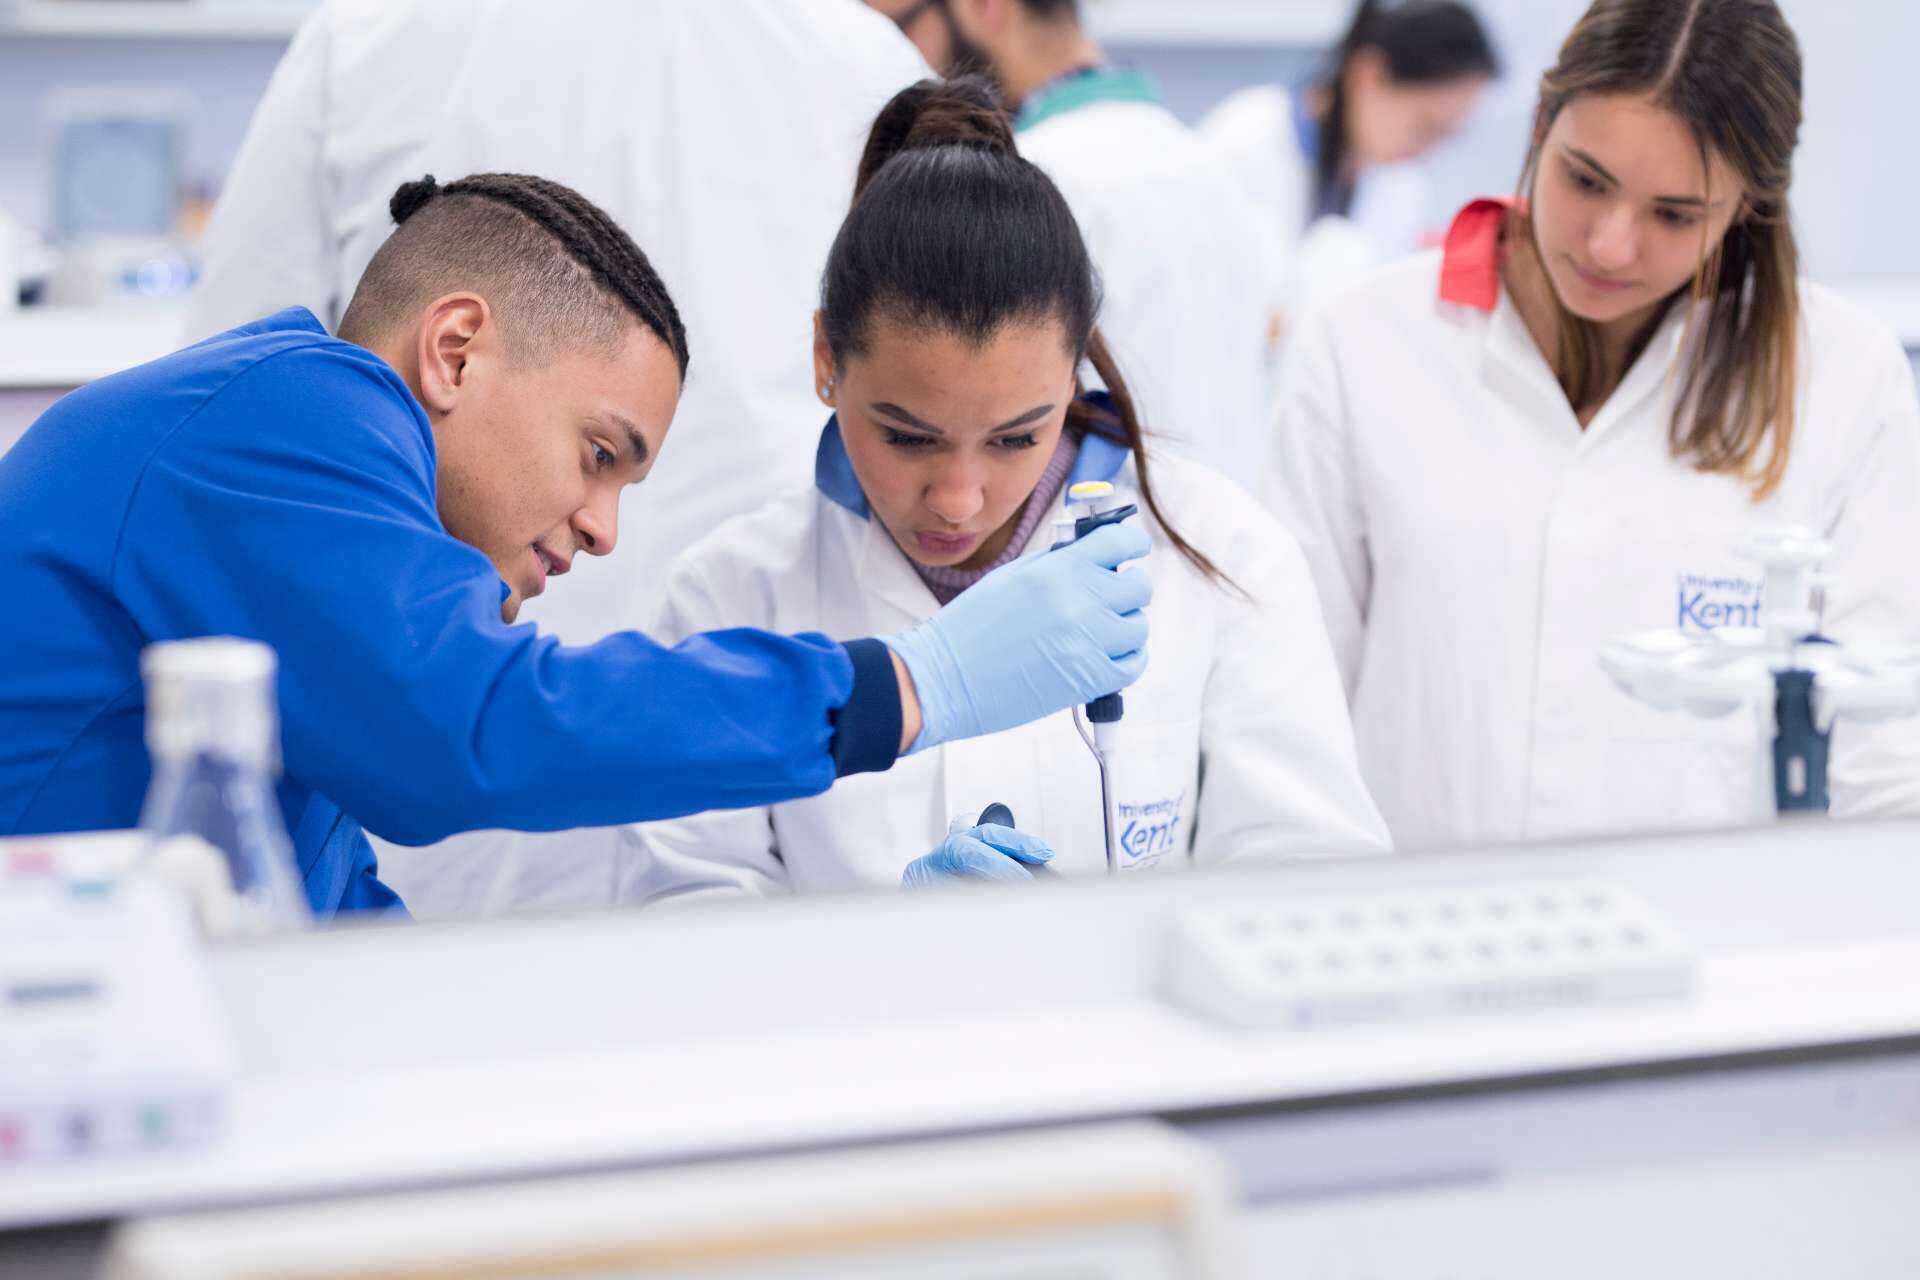 Two students using a pipette in an experiment whilst another female student looks on in the background